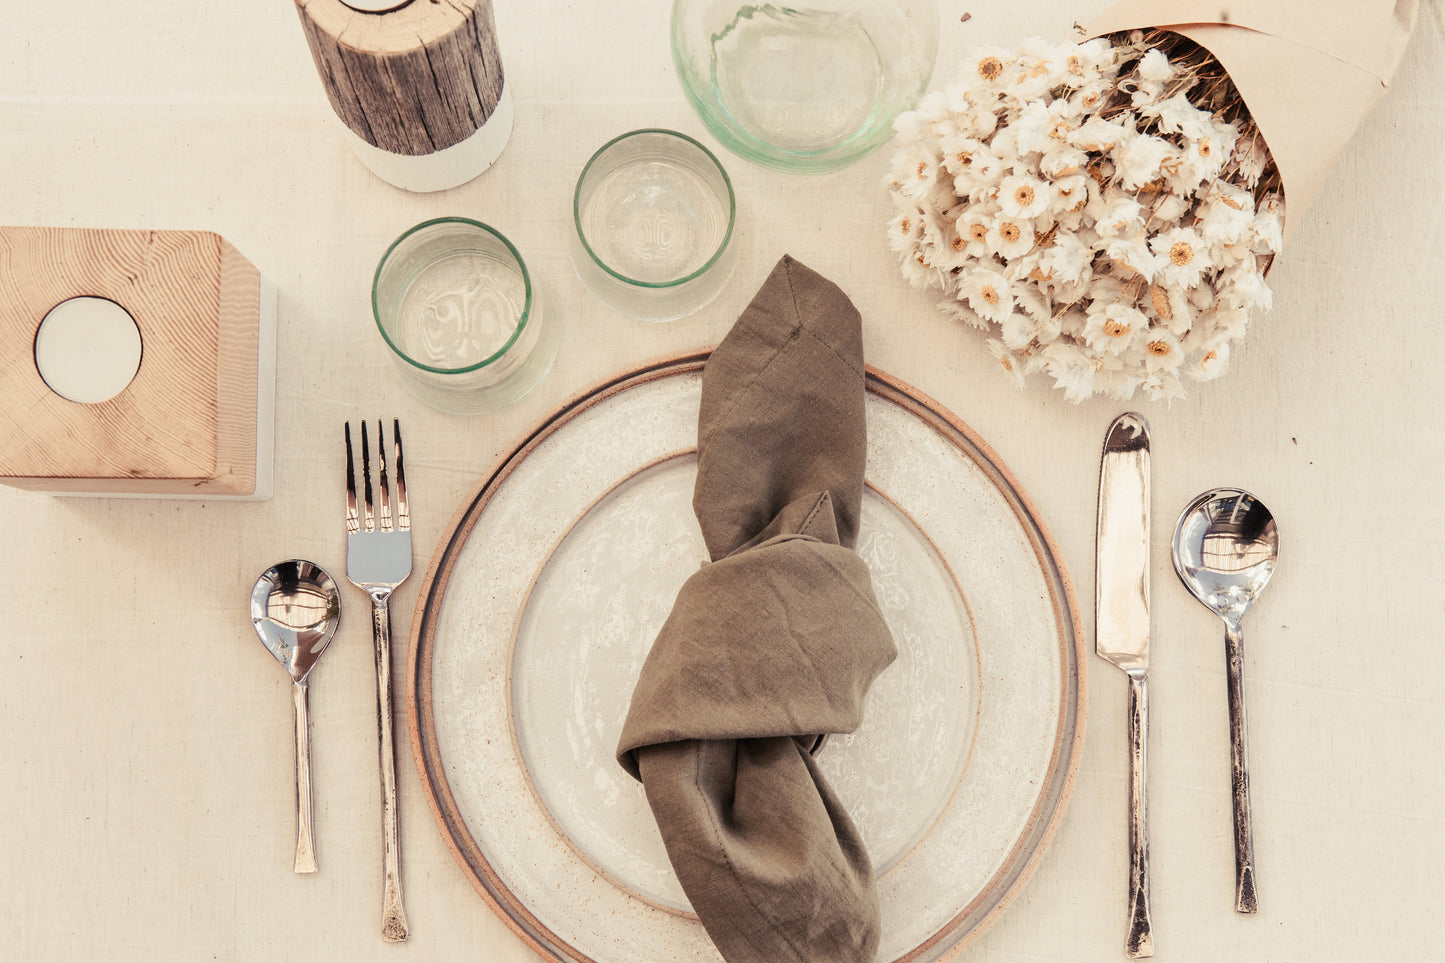 10 Styling Tips For Your Christmas Table